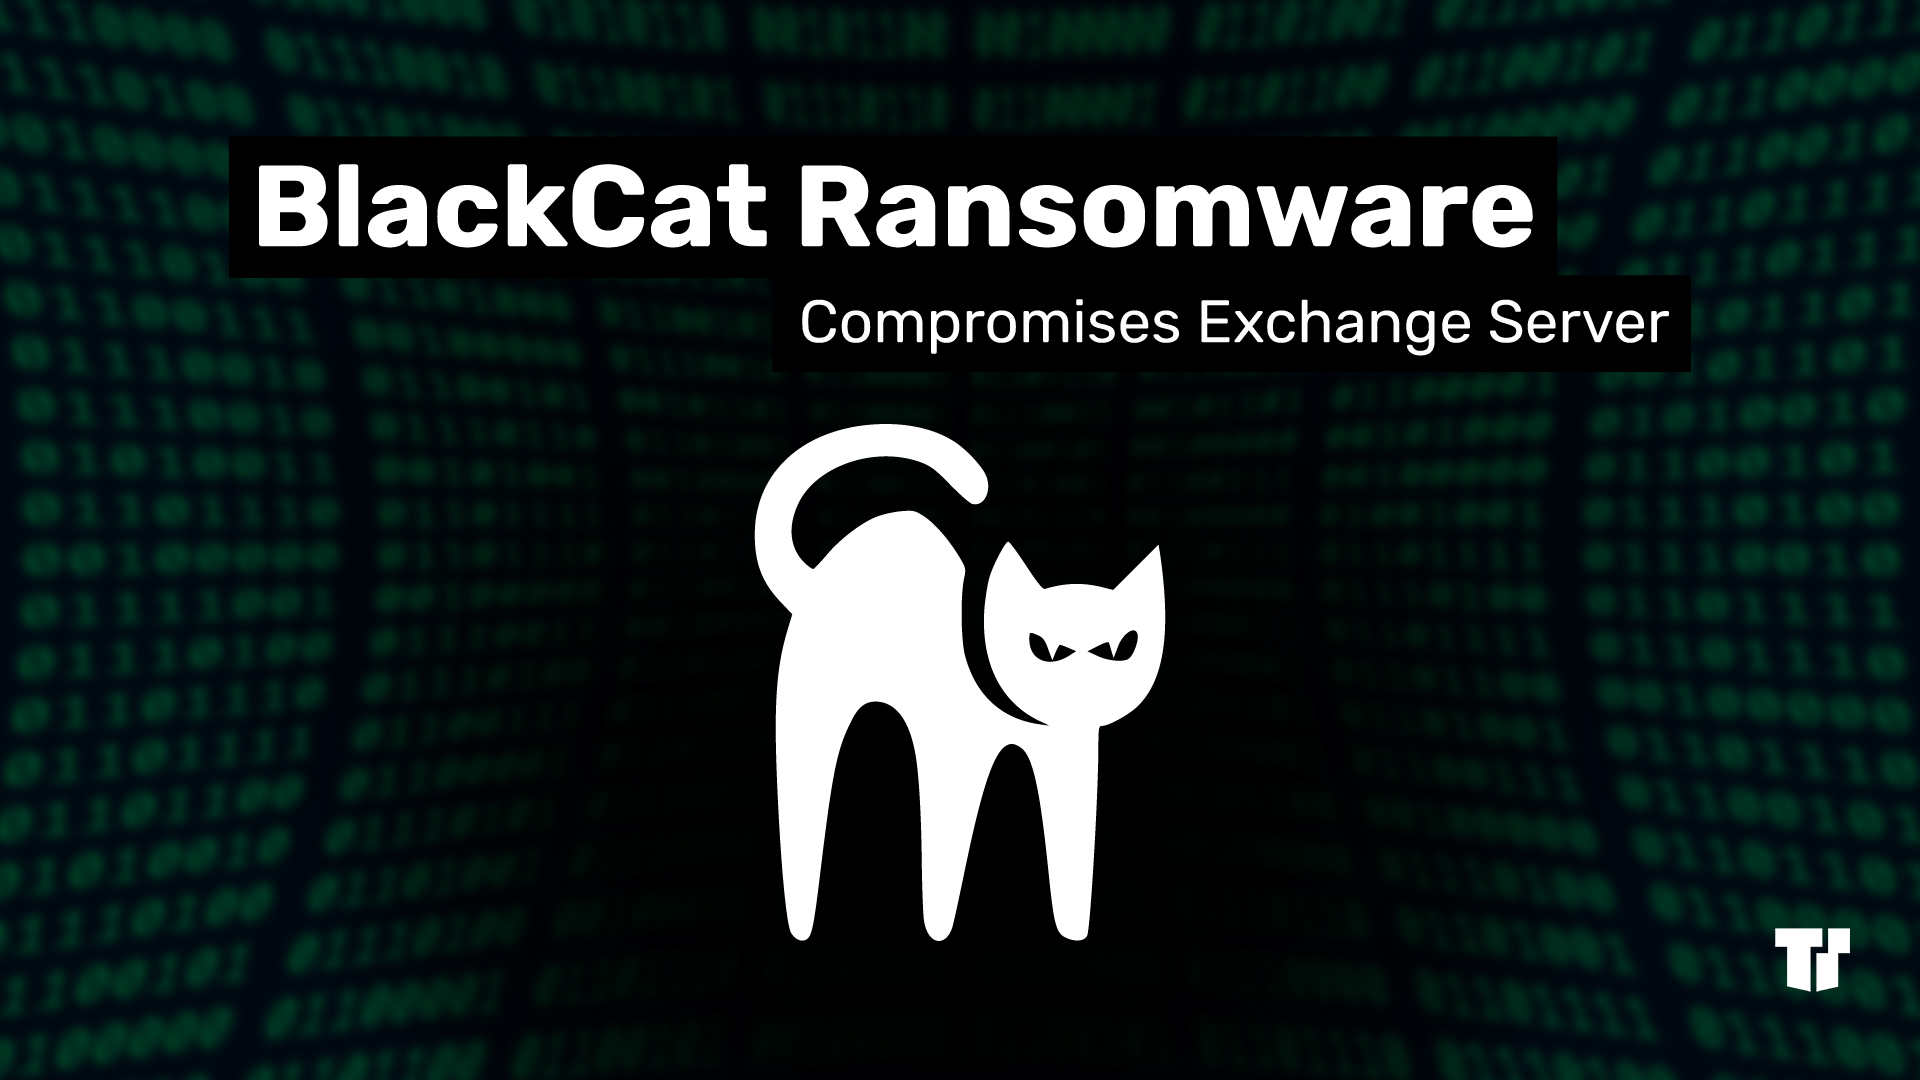 BlackCat Ransomware Scare Sweeps the IT Industry cover image